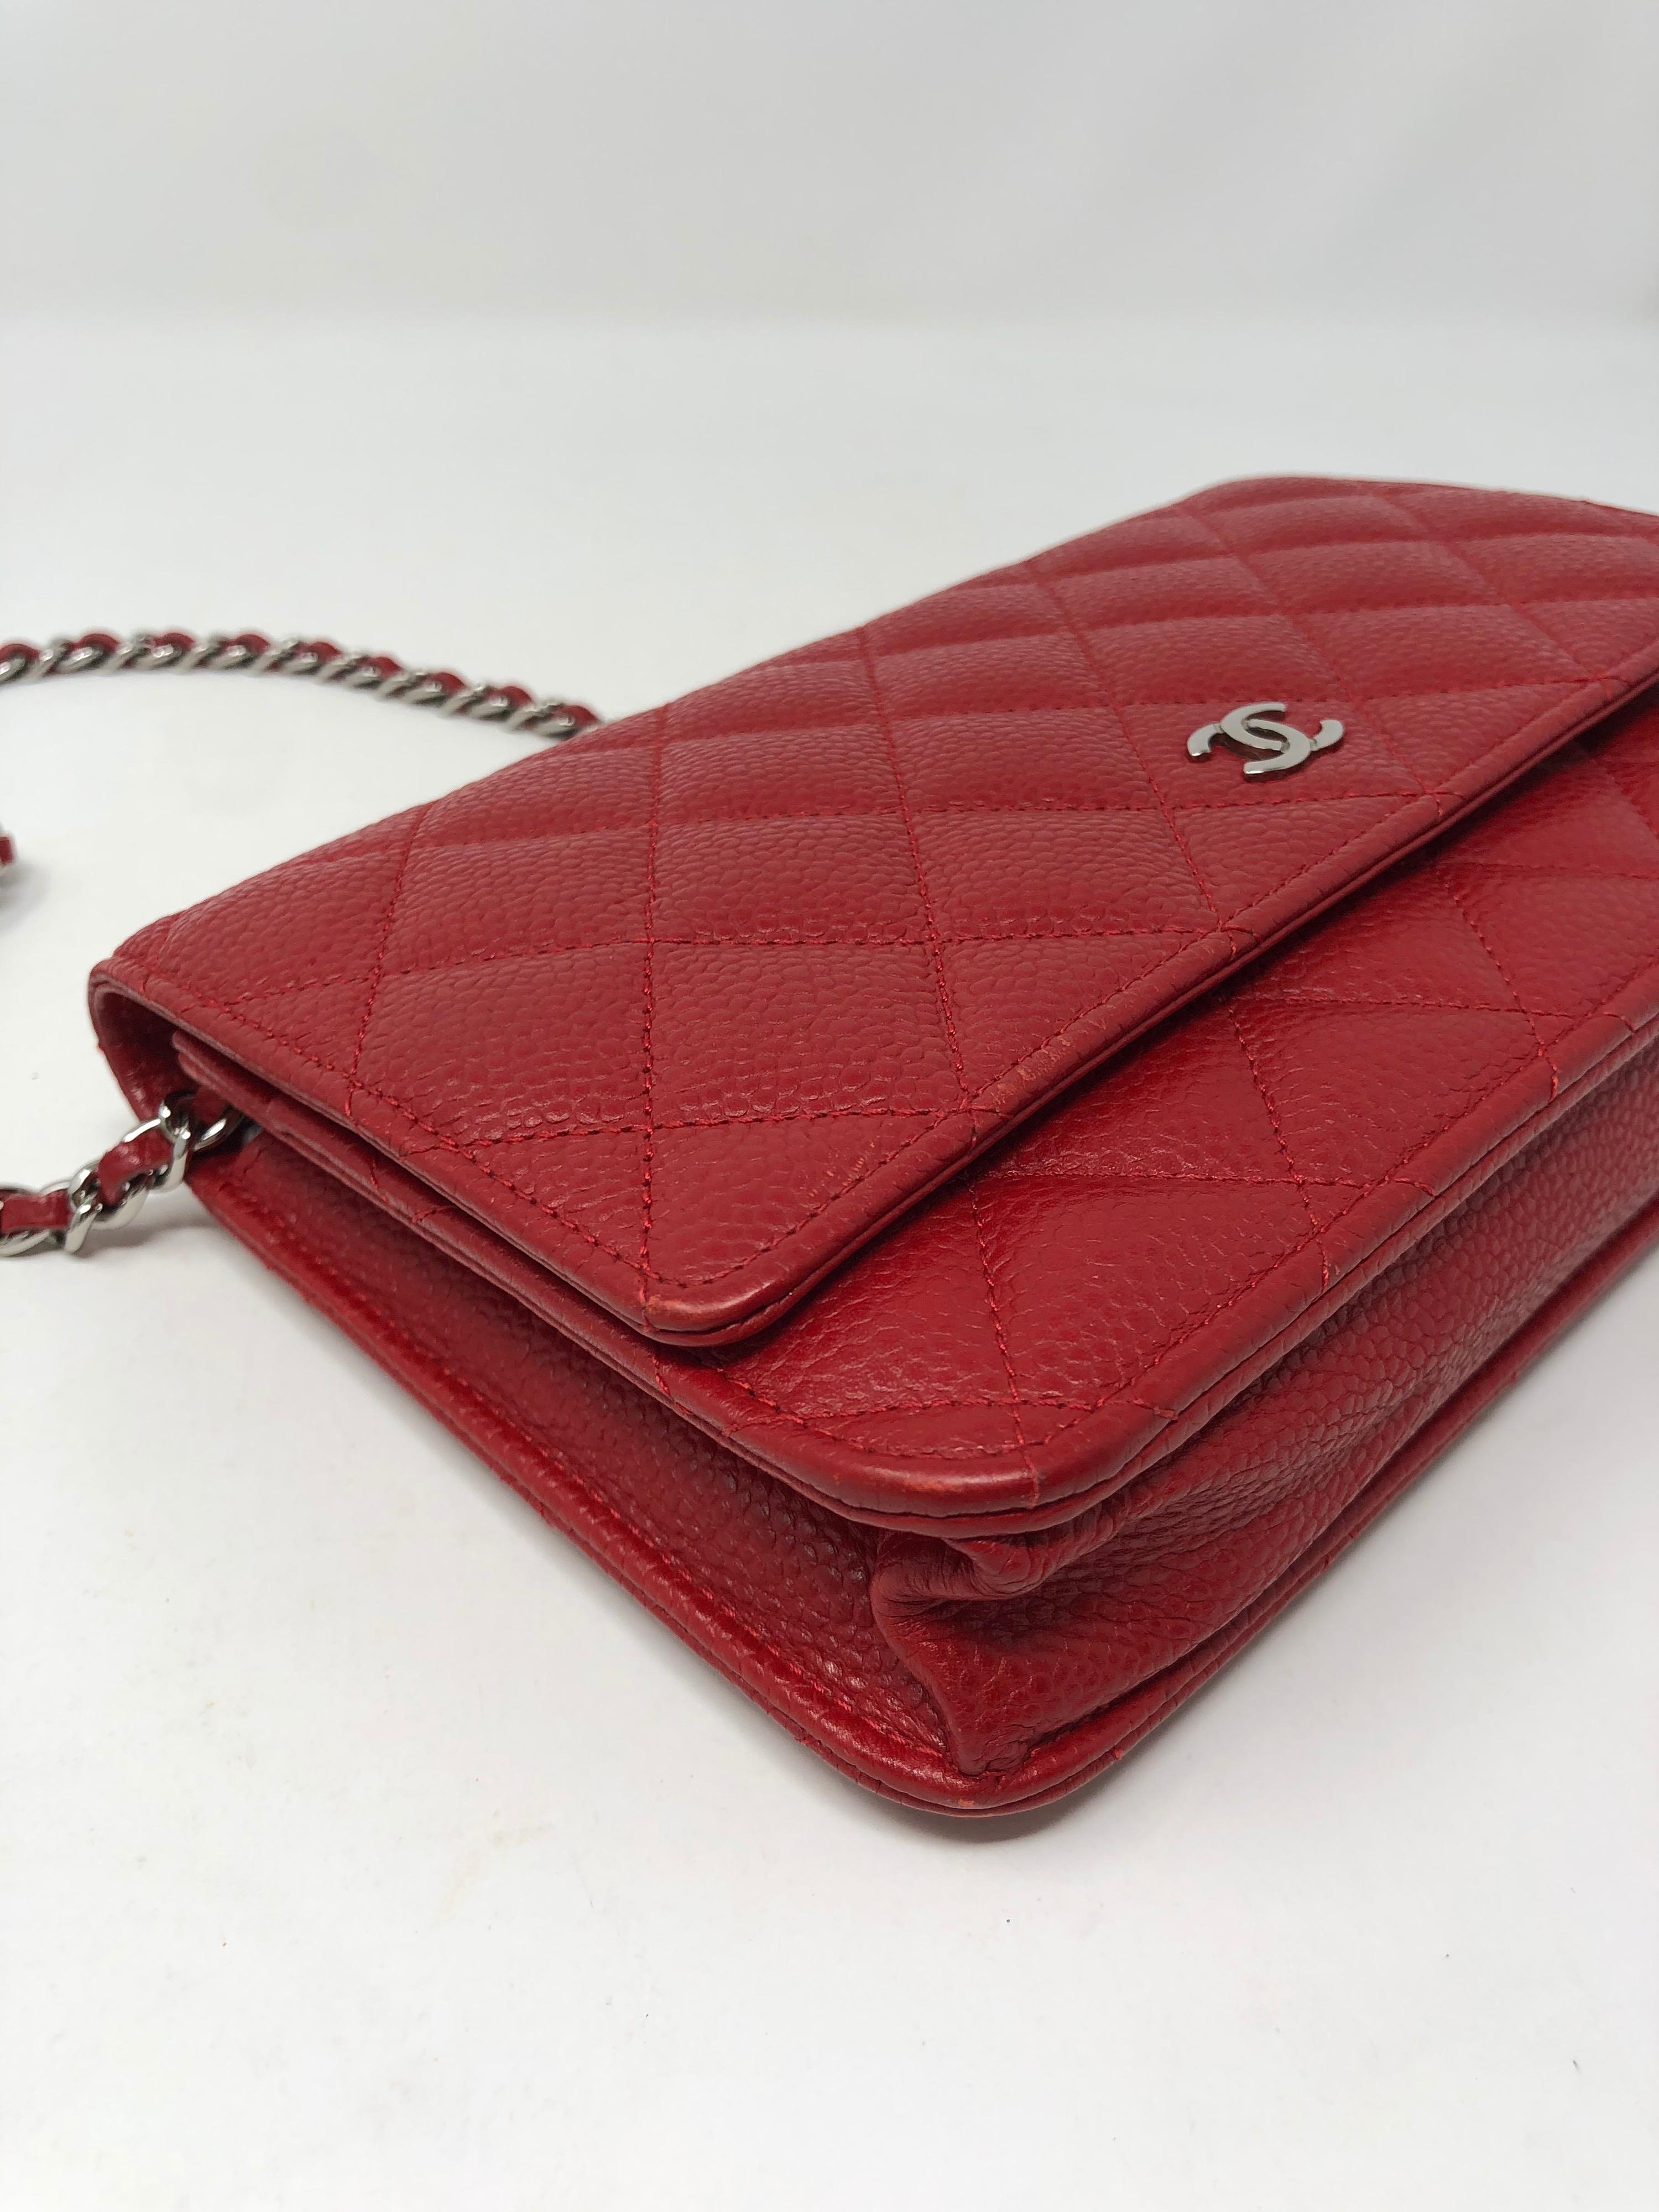 Chanel Red Caviar Wallet On A Chain Bag 6